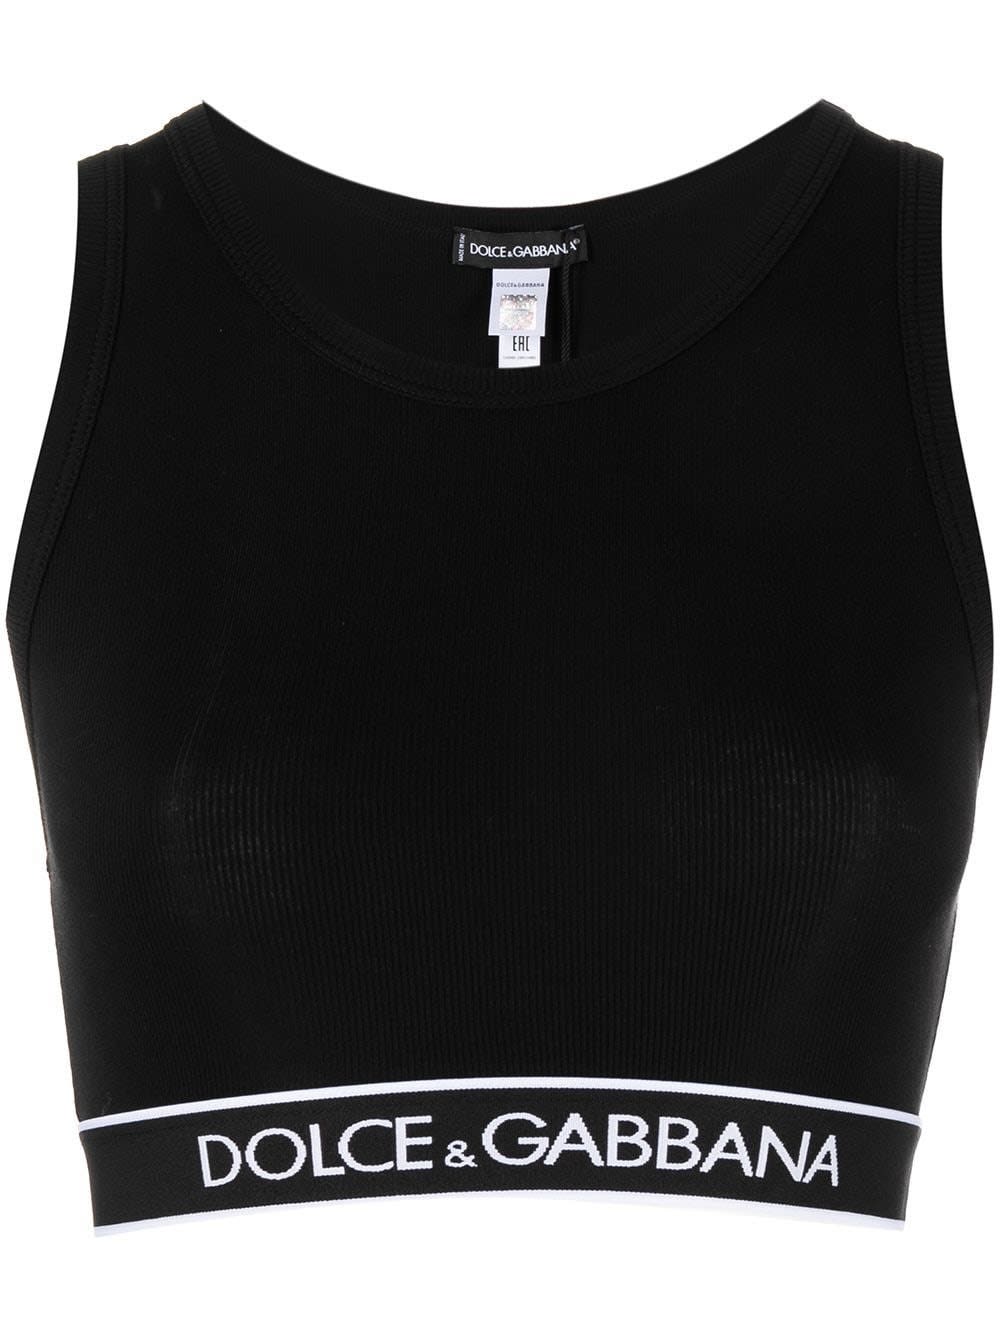 DOLCE & GABBANA JERSEY TOP WITH LOGO,11772413